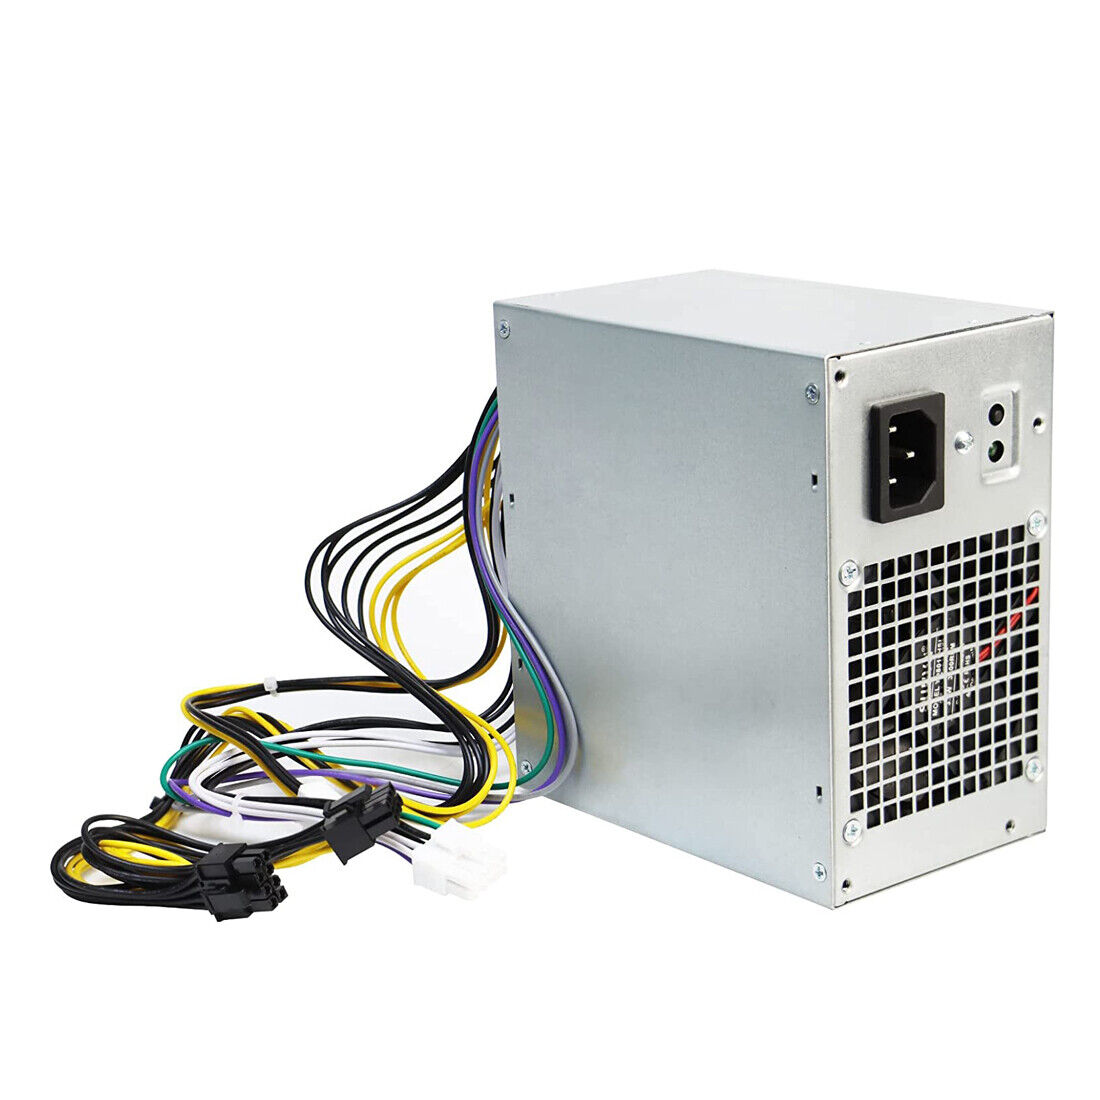 New HK465-11PP T1M43 365W Power Supply Fits DELL Precision 3620 T3620 T1700 T20